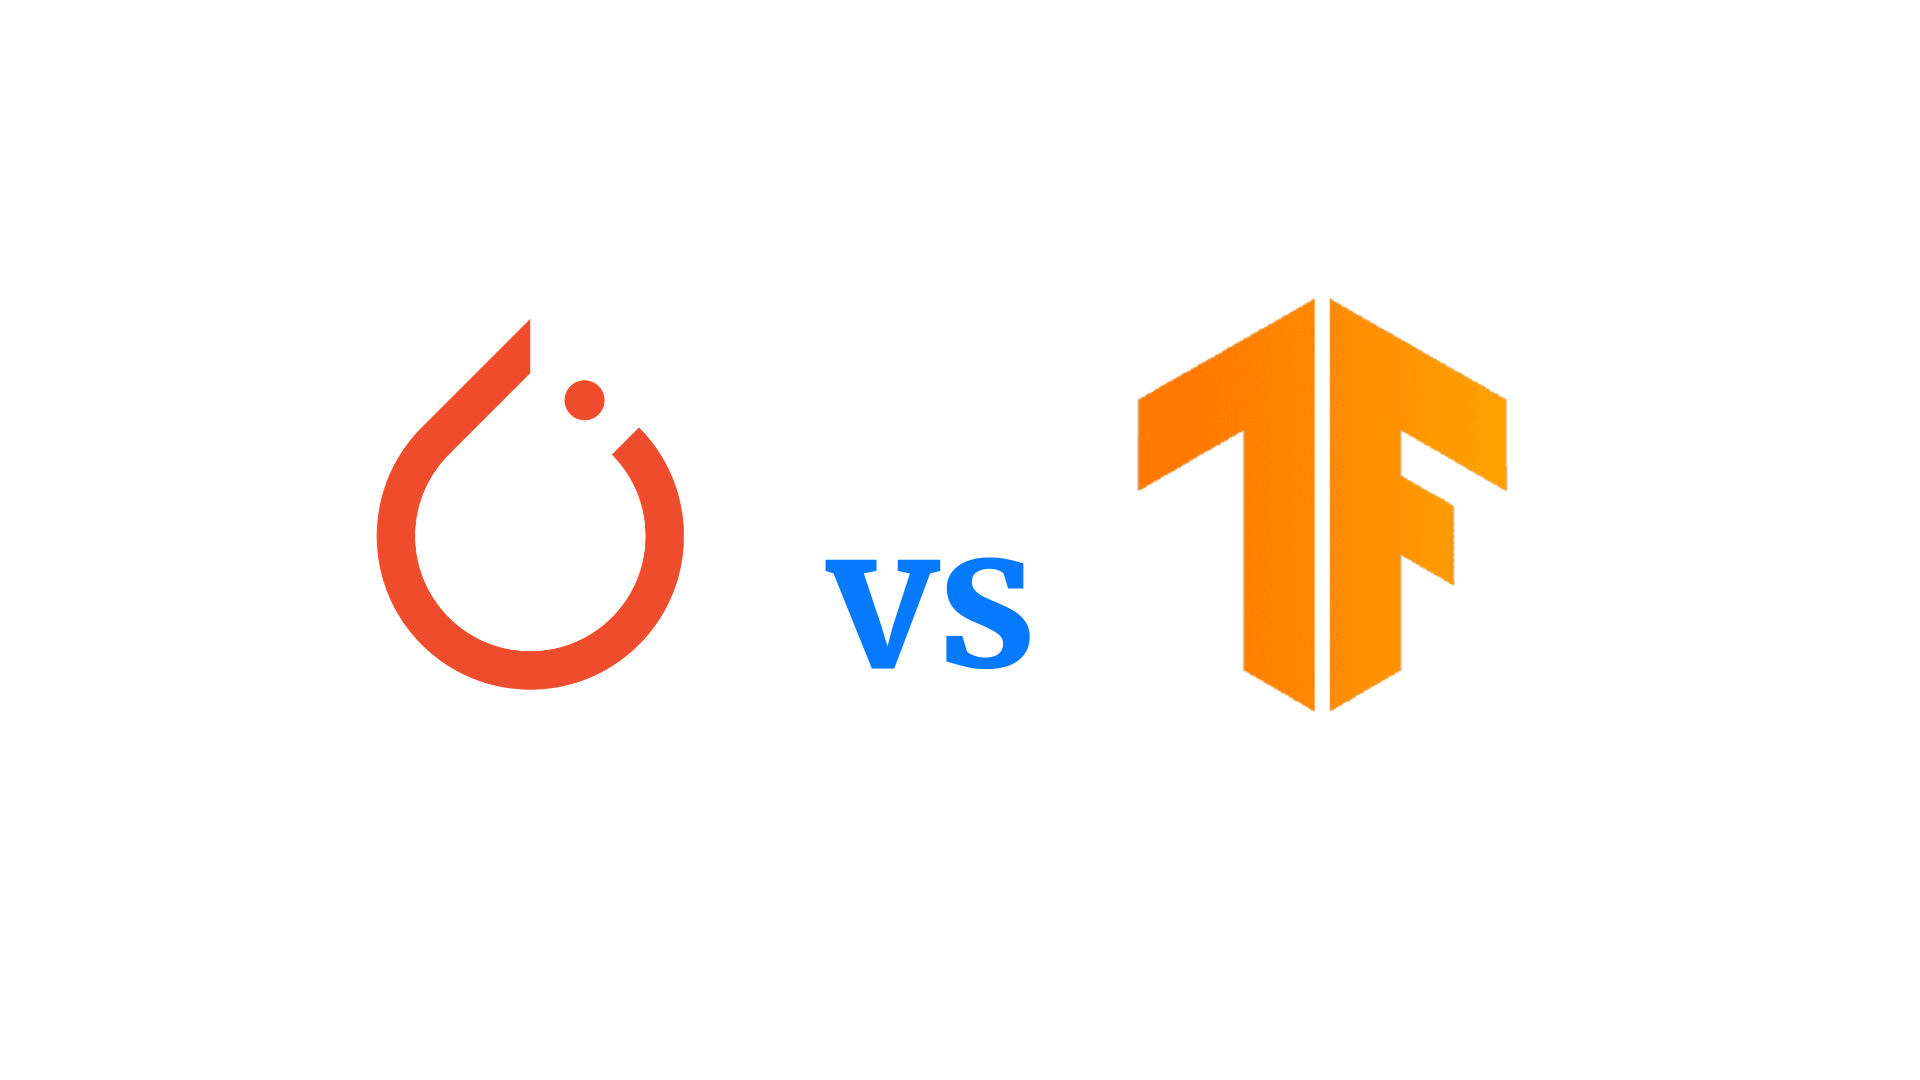 PyTorch vs TensorFlow: comparing deep learning frameworks